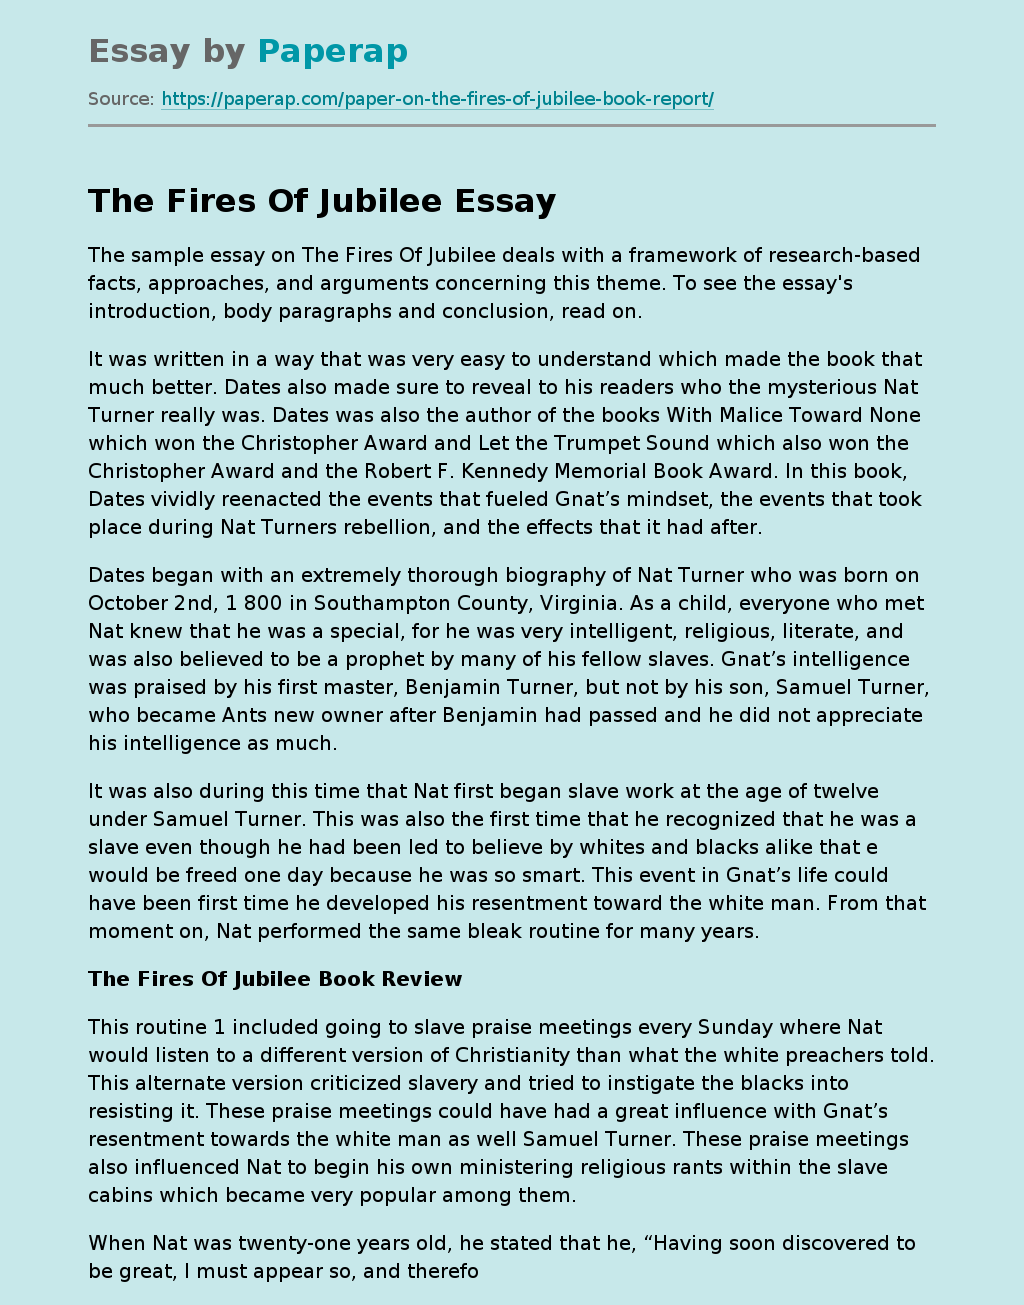 The Fires Of Jubilee